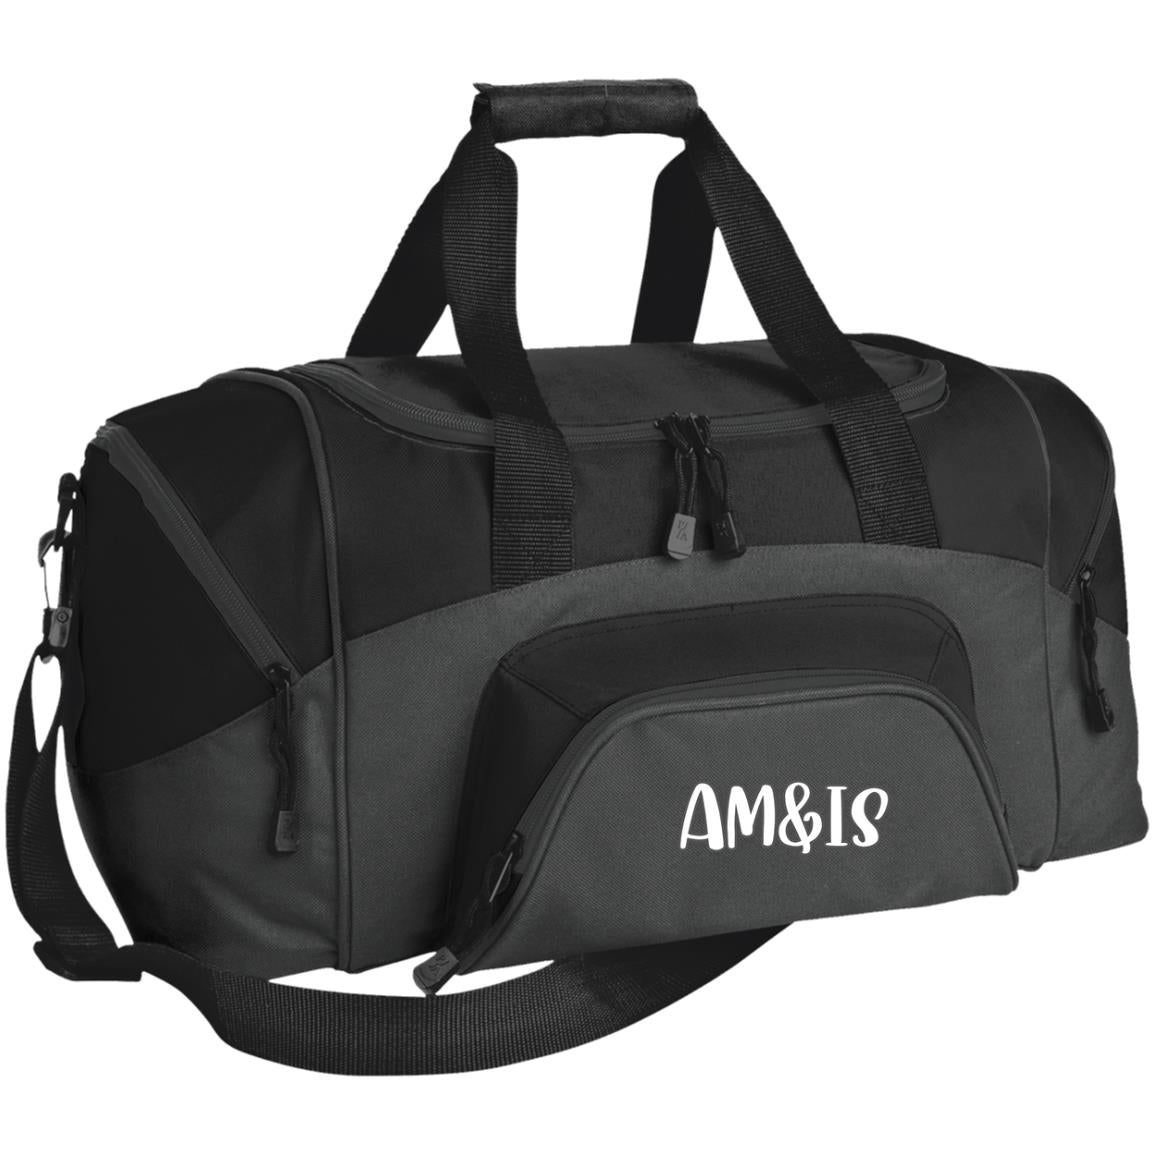 DARK CHARCOAL/BLACK ONE SIZE AM&IS Activewear Small Colorblock Sport Duffel Bag - duffel bag at TFC&H Co.